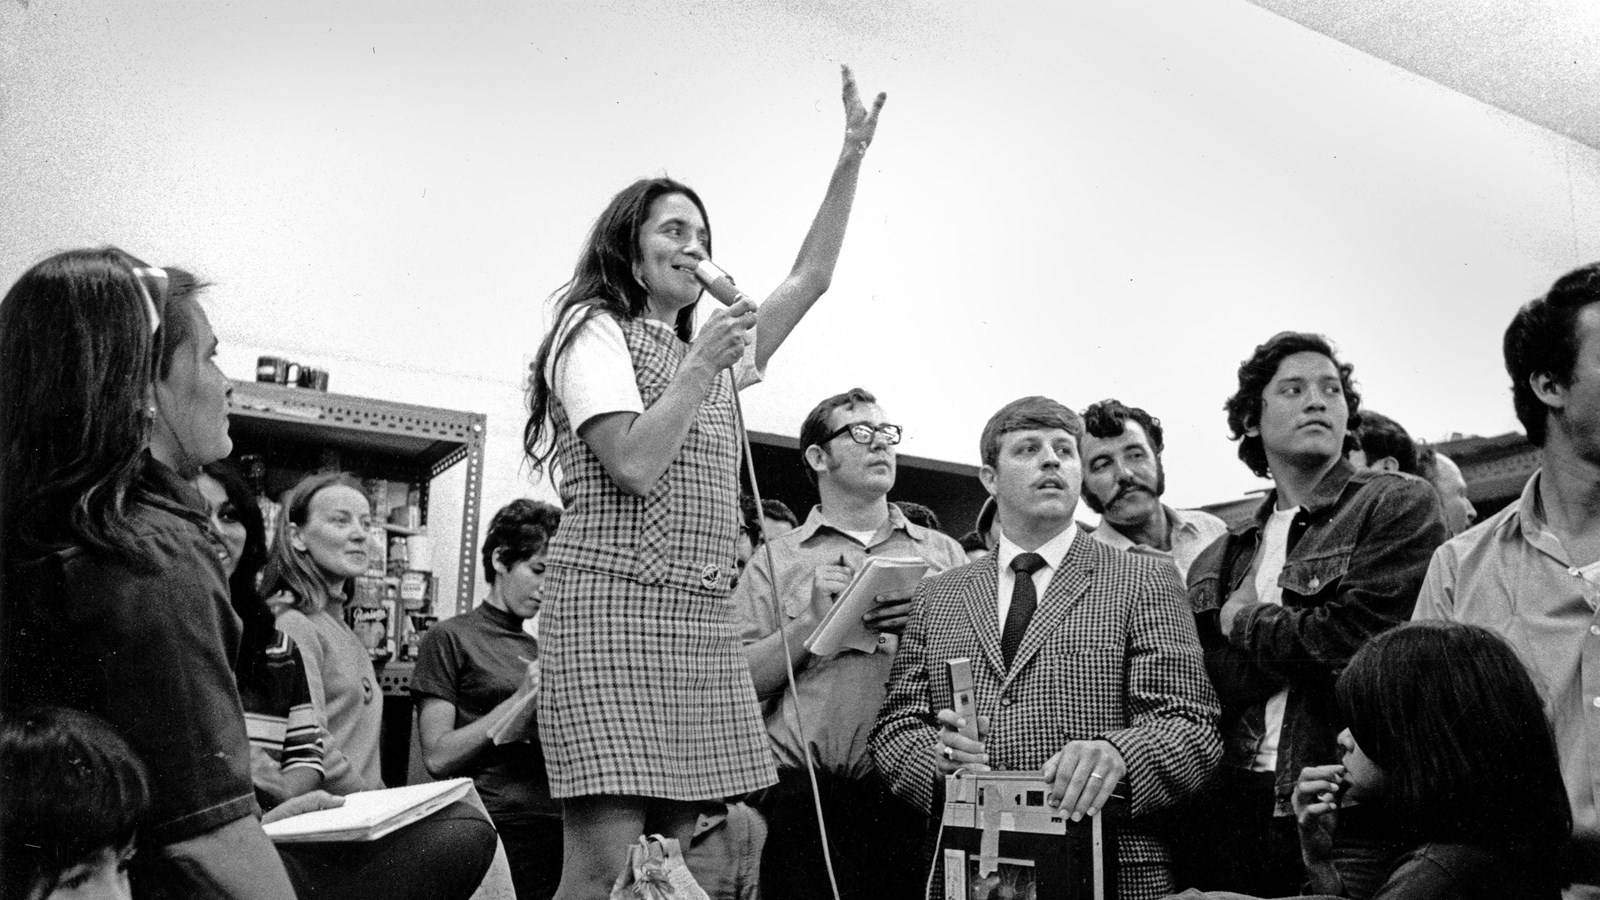 Dolores Huerta speaking at a protest